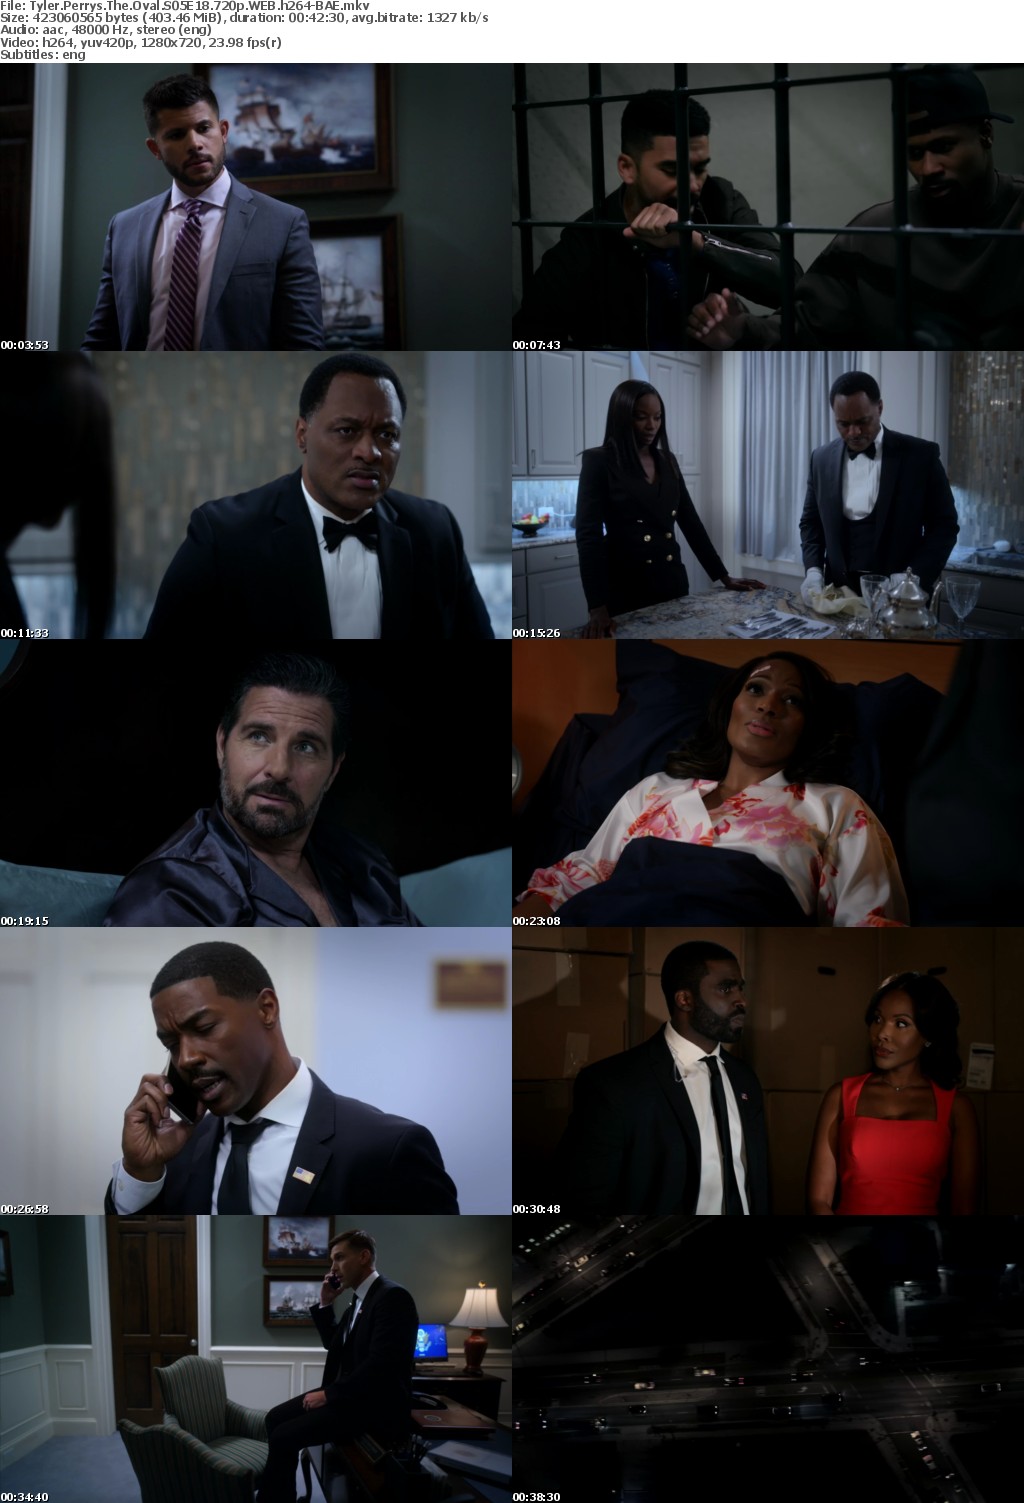 Tyler Perrys The Oval S05E18 720p WEB h264-BAE